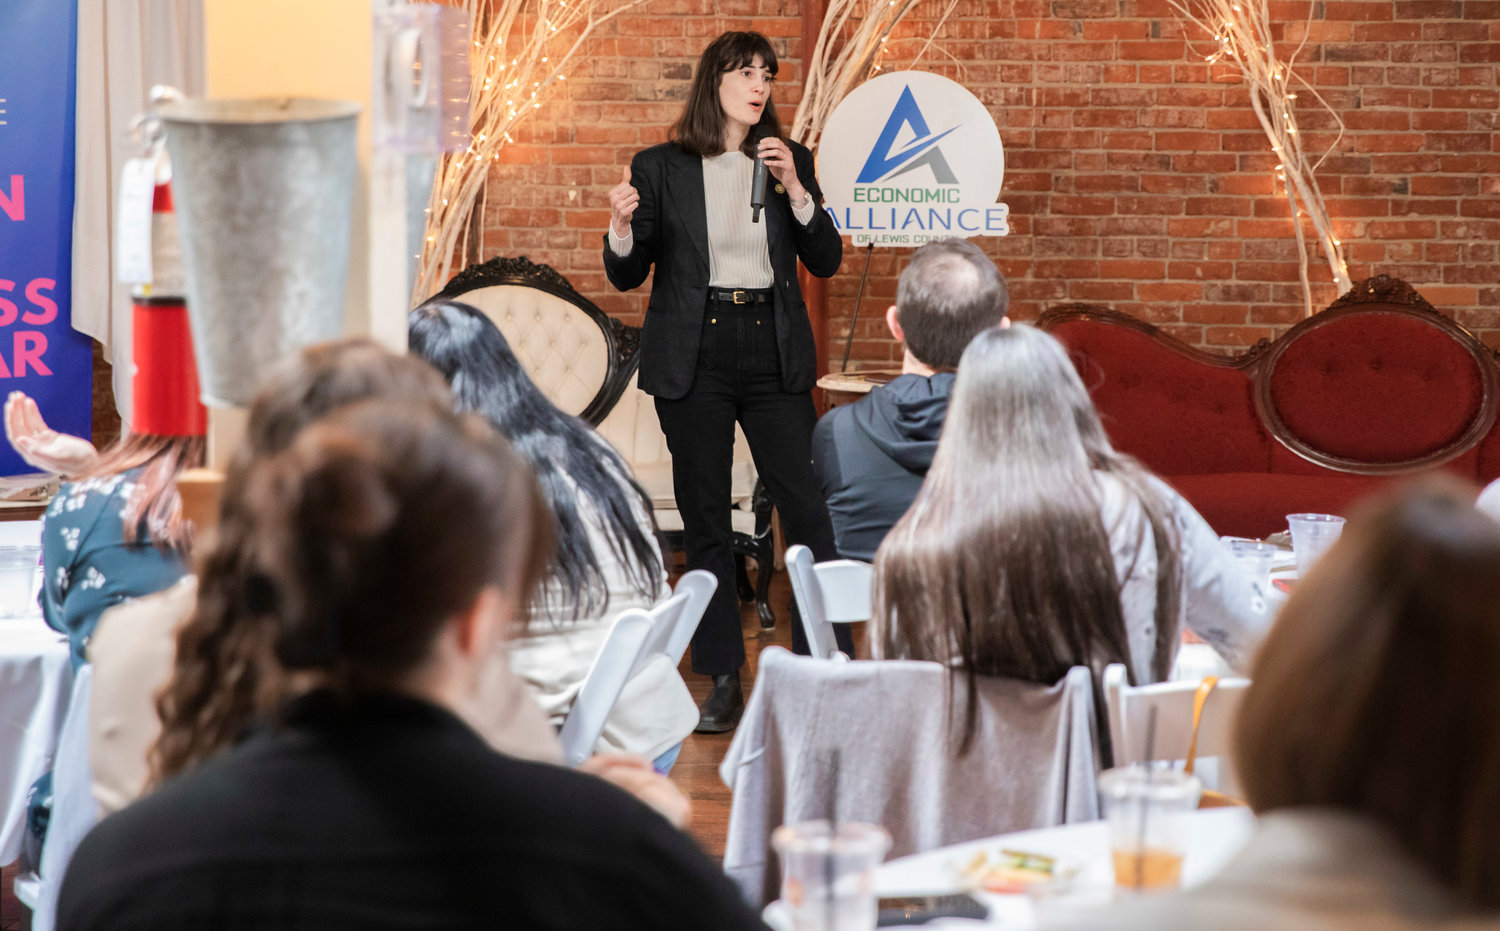 Congresswoman Marie Gluesenkamp Perez talks at attendees during a Women in Business Seminar inside the Vintage Grand Room at the Washington Hotel in Chehalis.